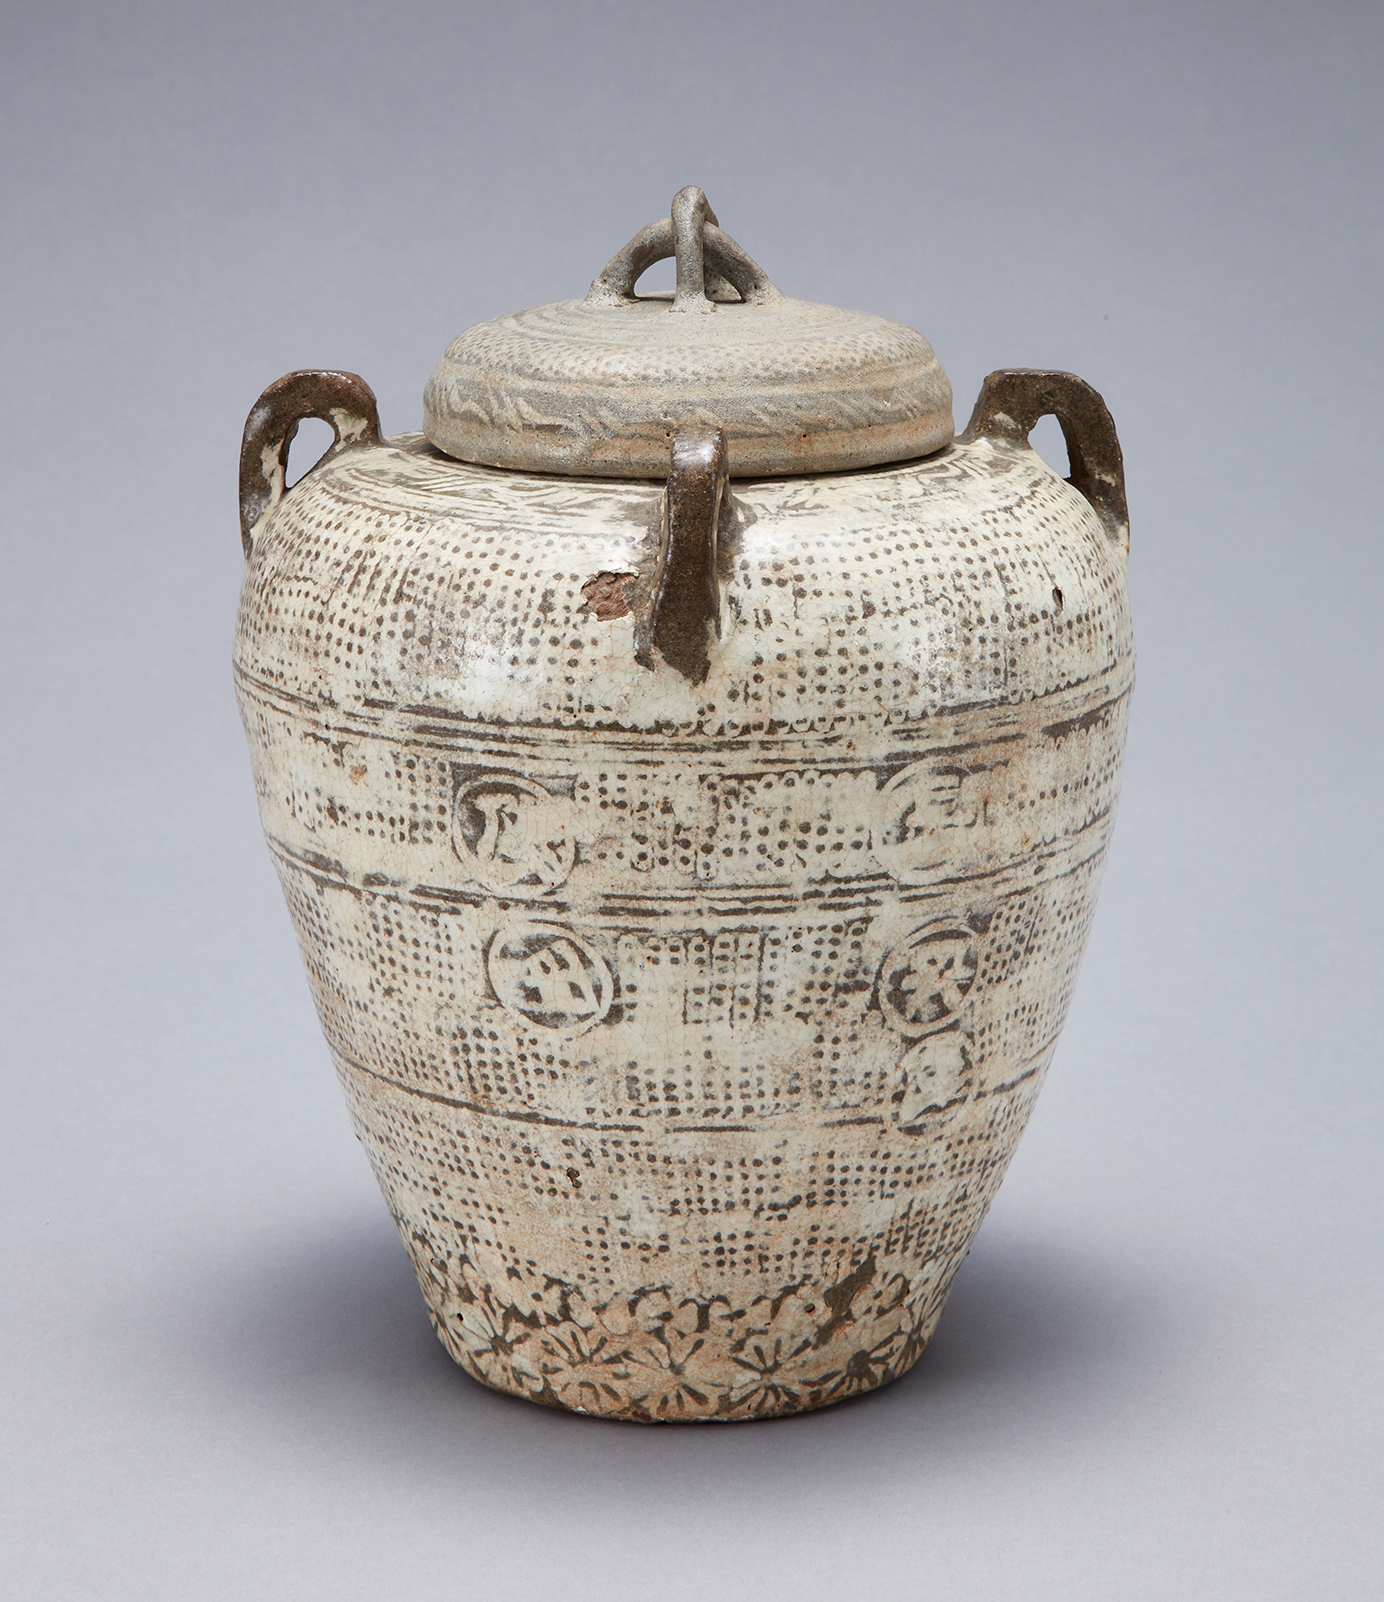 Placenta Jar and Cover with Stamped Design and the Inscription of “Gyeongju-jangheunggo”